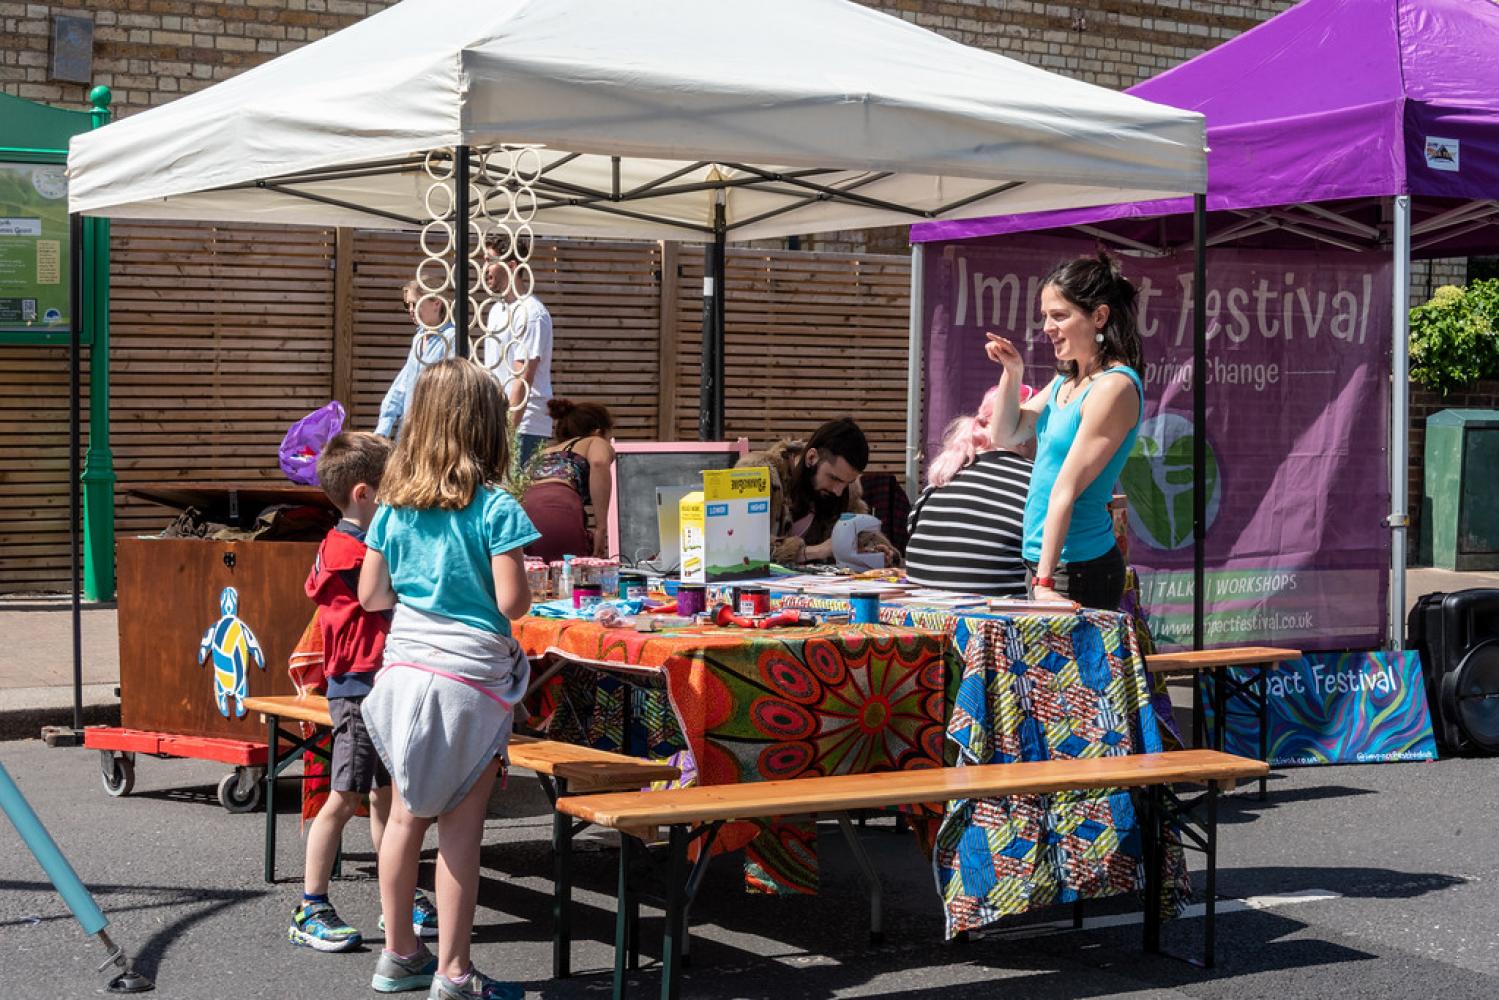 A woman talks to children next to colourful stalls and gazebos